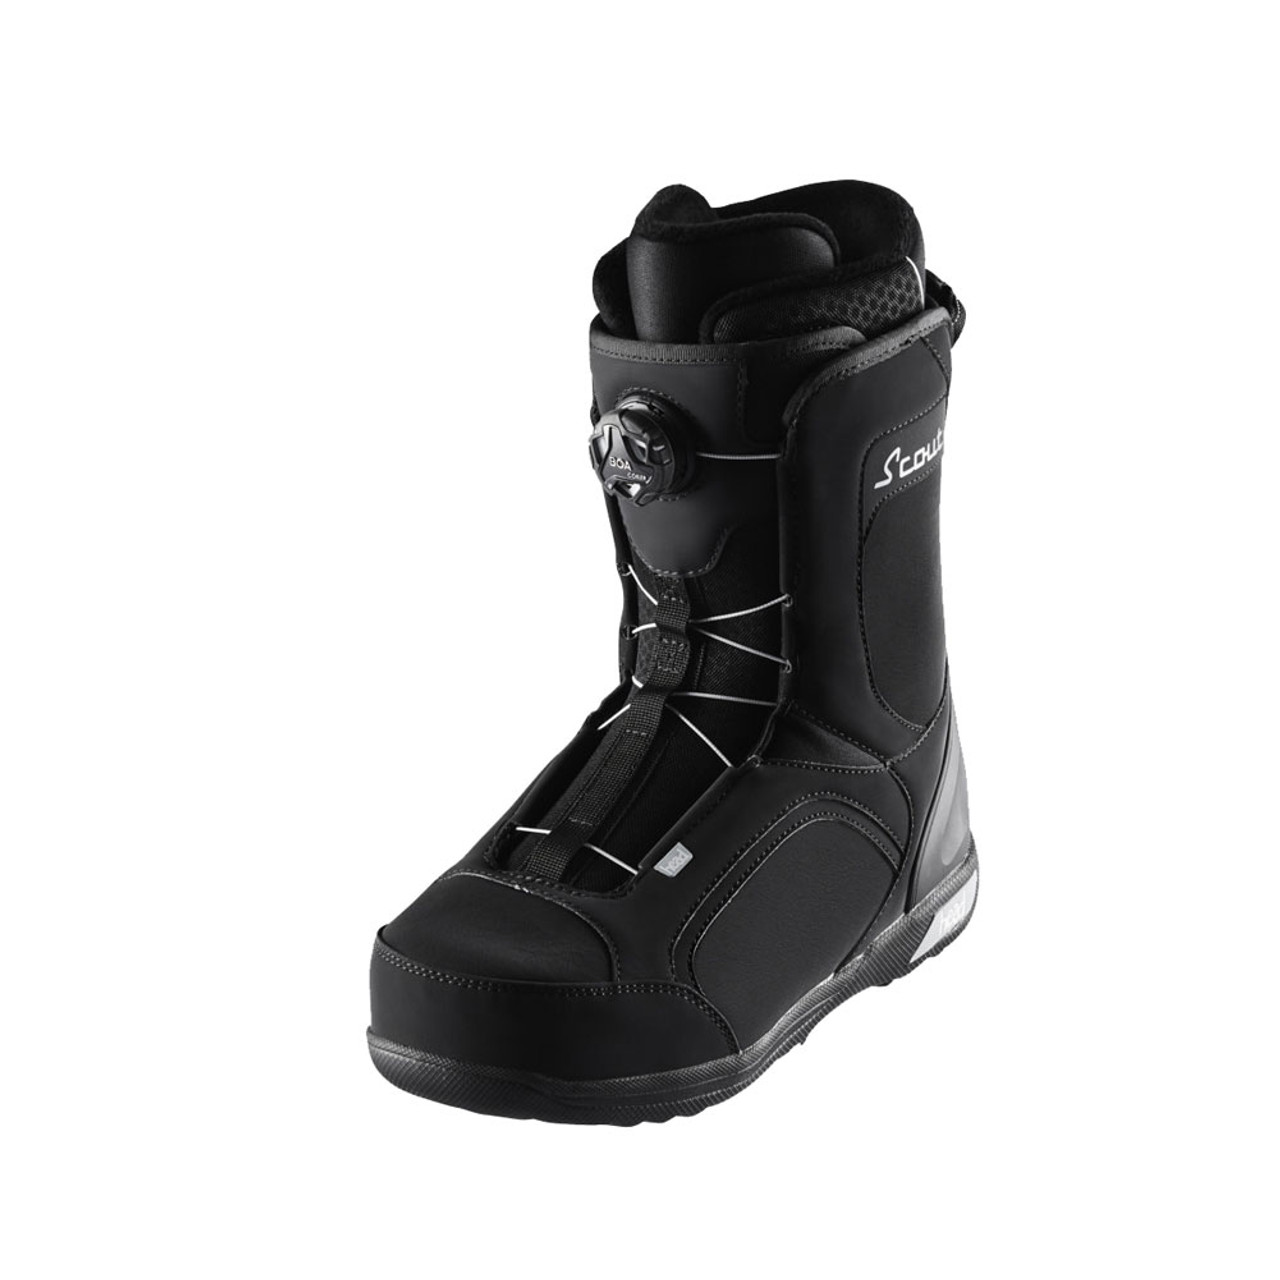 HEAD Unisex SCOUT LYT BOA Coiler Snowboard Boots 353312